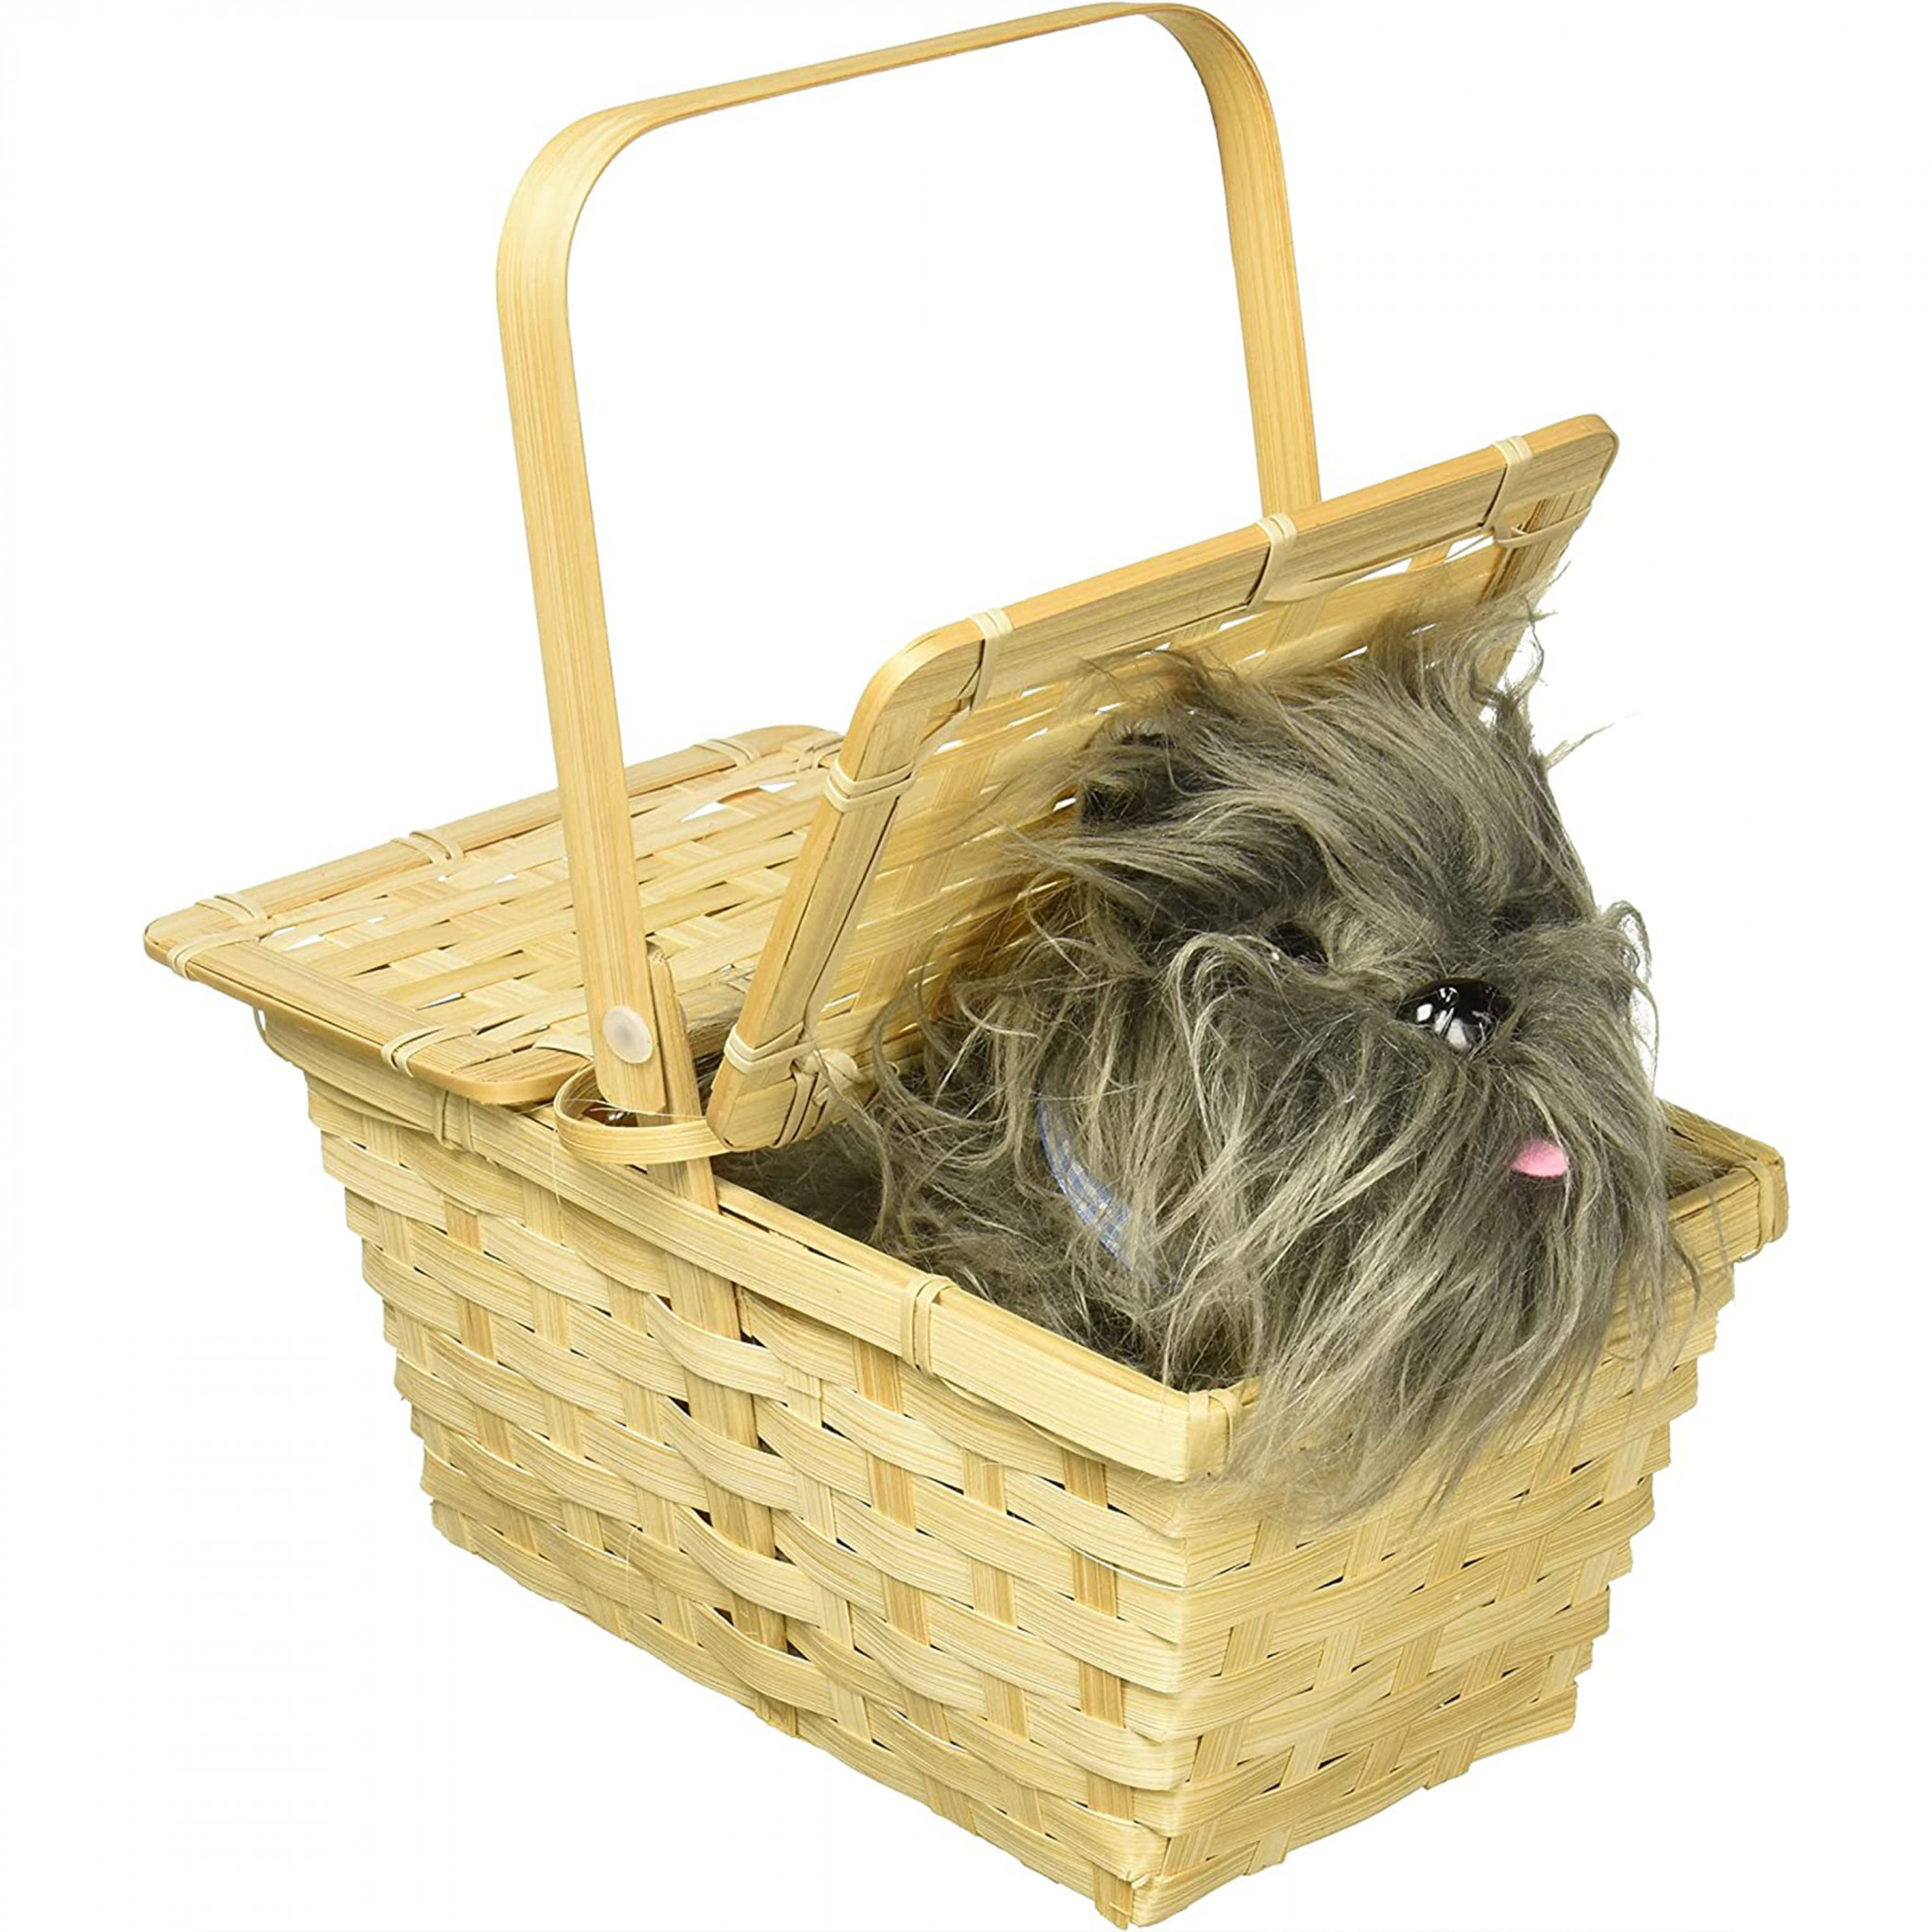 The Wizard of Oz Toto Cosplay Basket